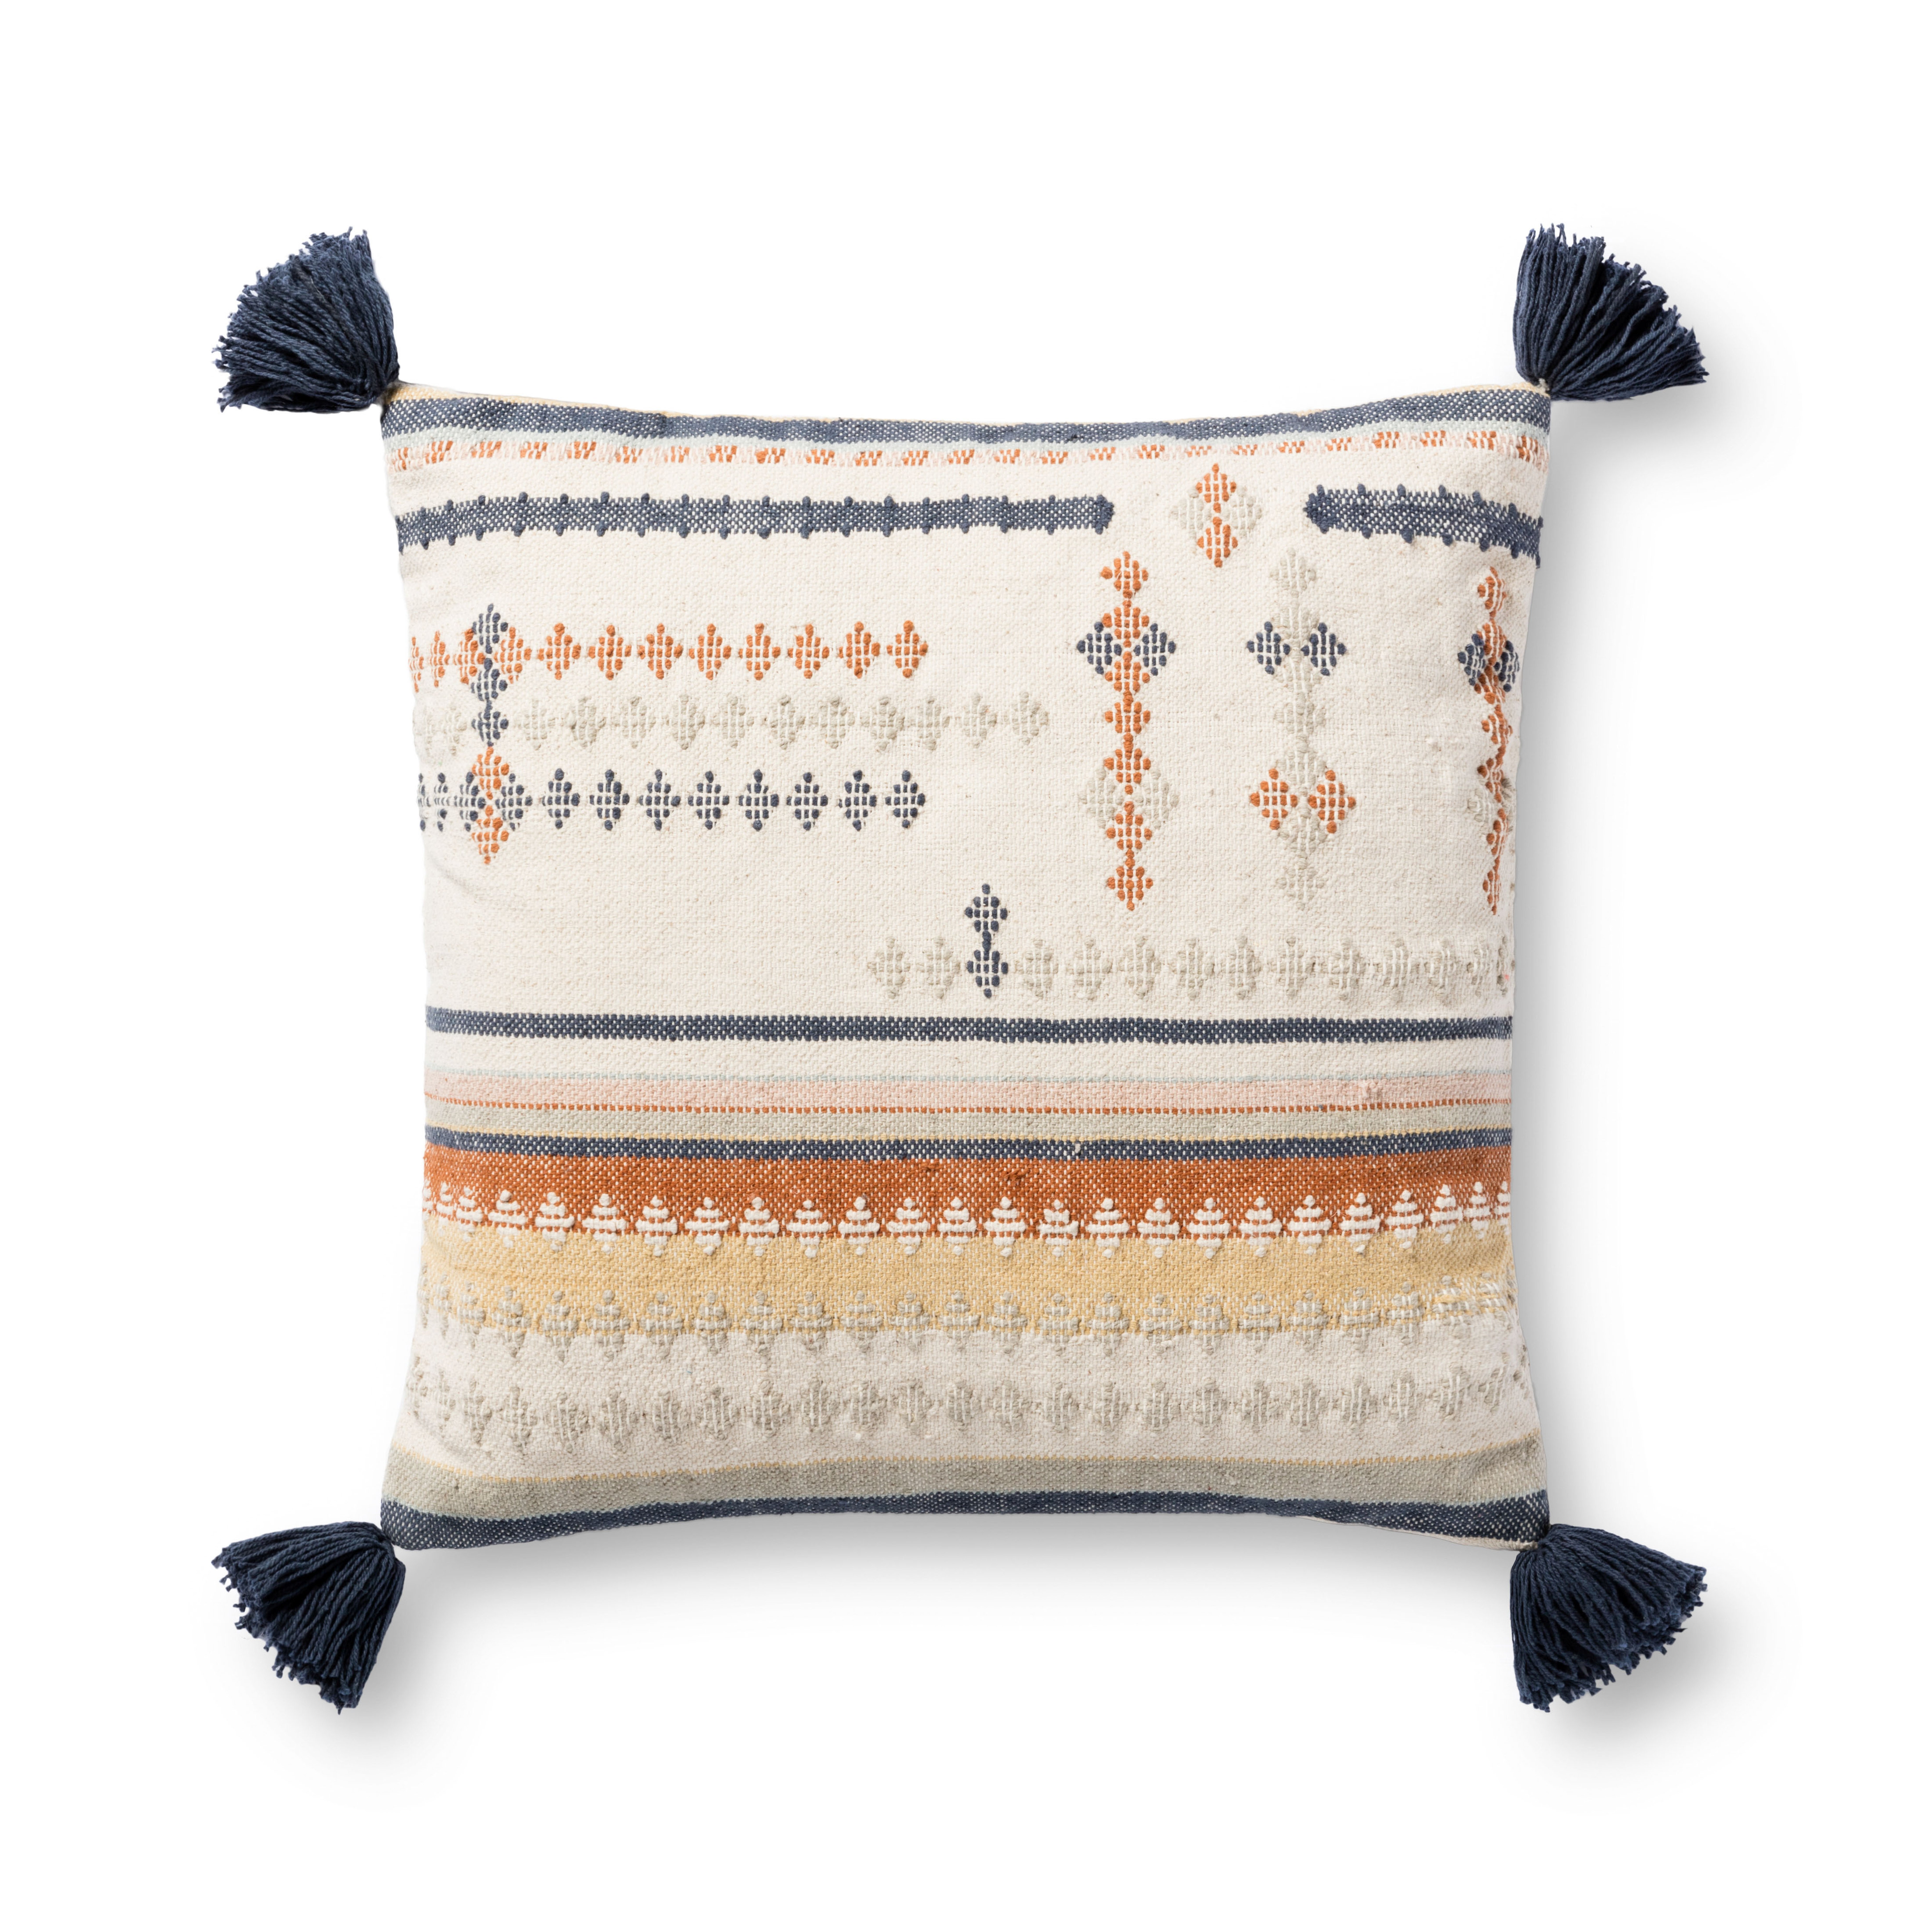 Handcrafted Throw Pillow with Tassels, 18" x 18", Orange, Cream & Blue - Magnolia Home by Joana Gaines Crafted by Loloi Rugs